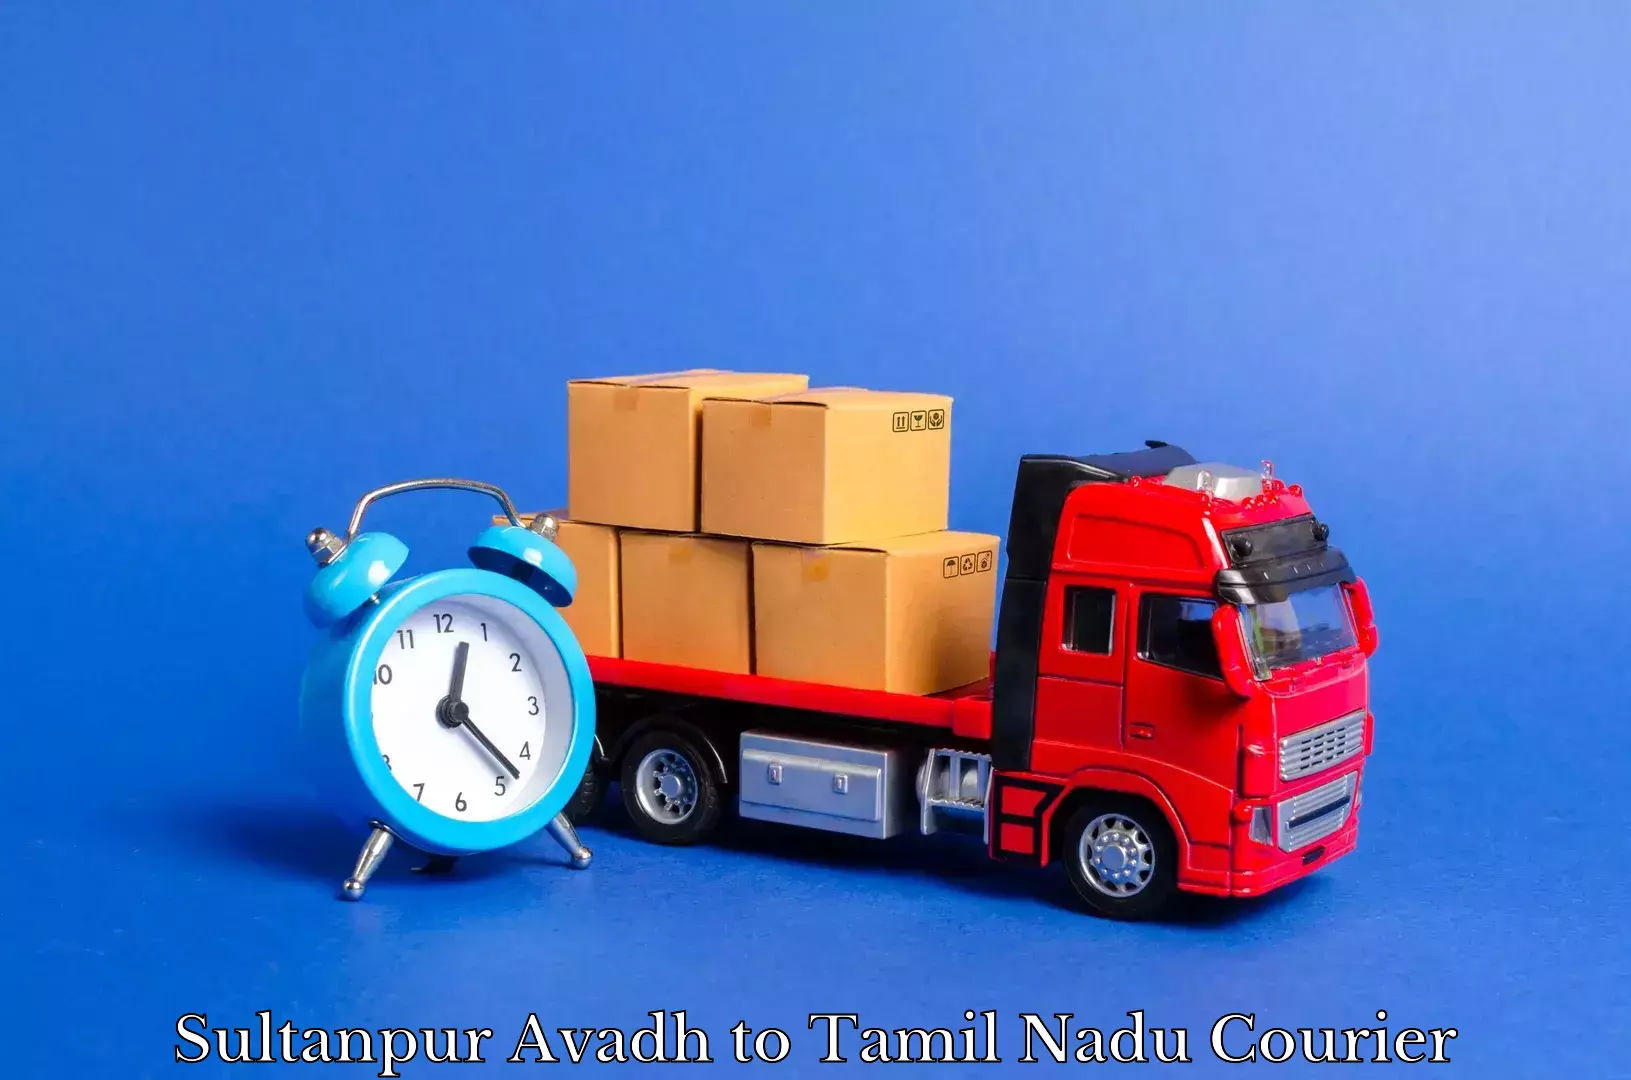 Reliable movers Sultanpur Avadh to Chennai Port